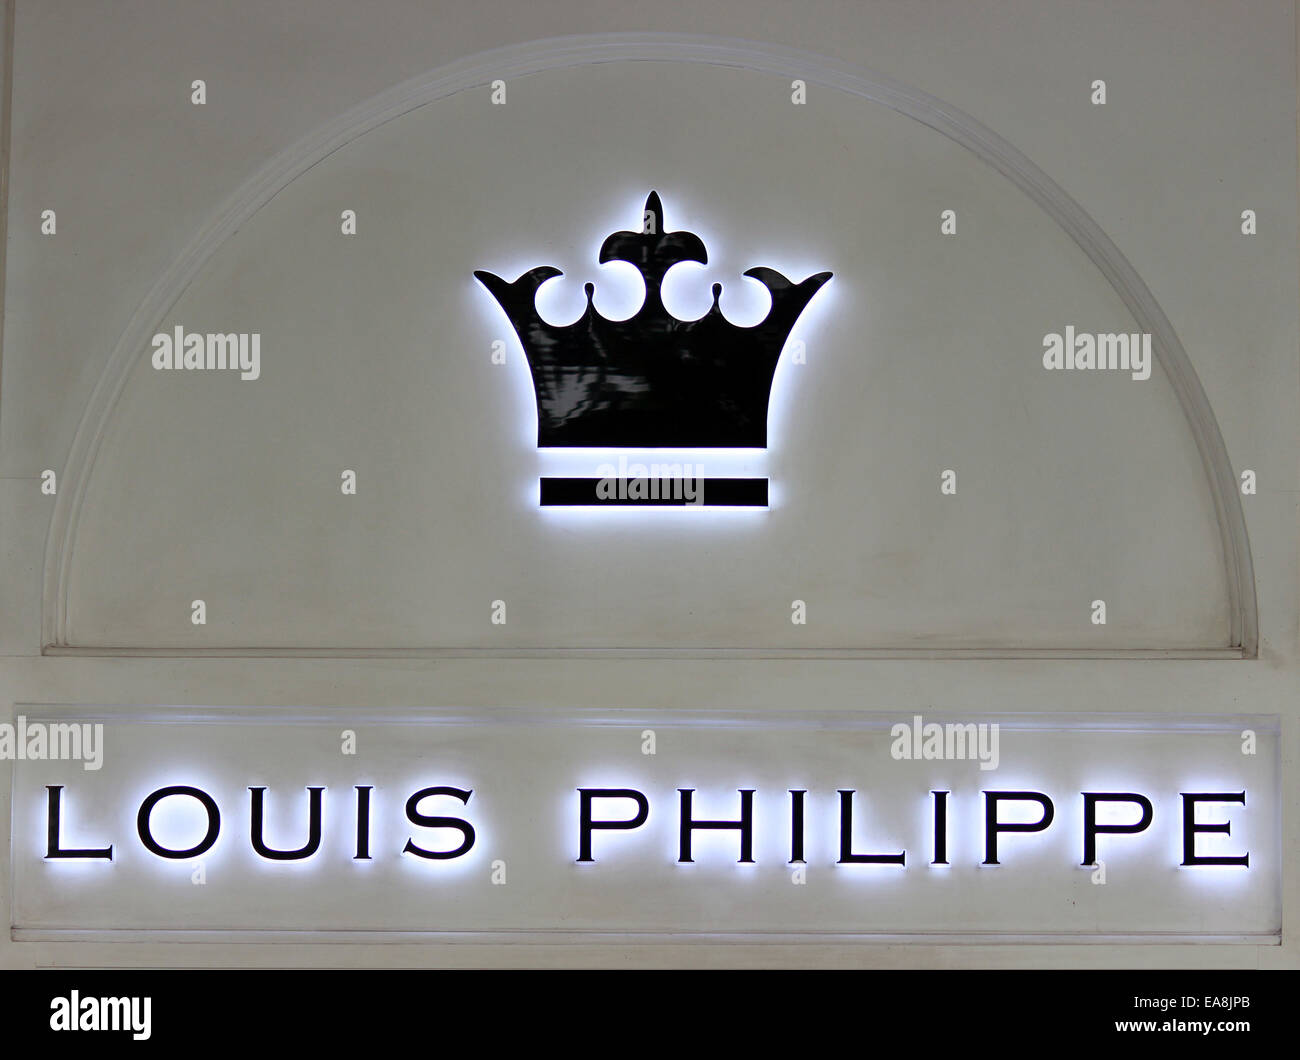 Ad Campaign: Louis Philippe unveils Permapress collection with new